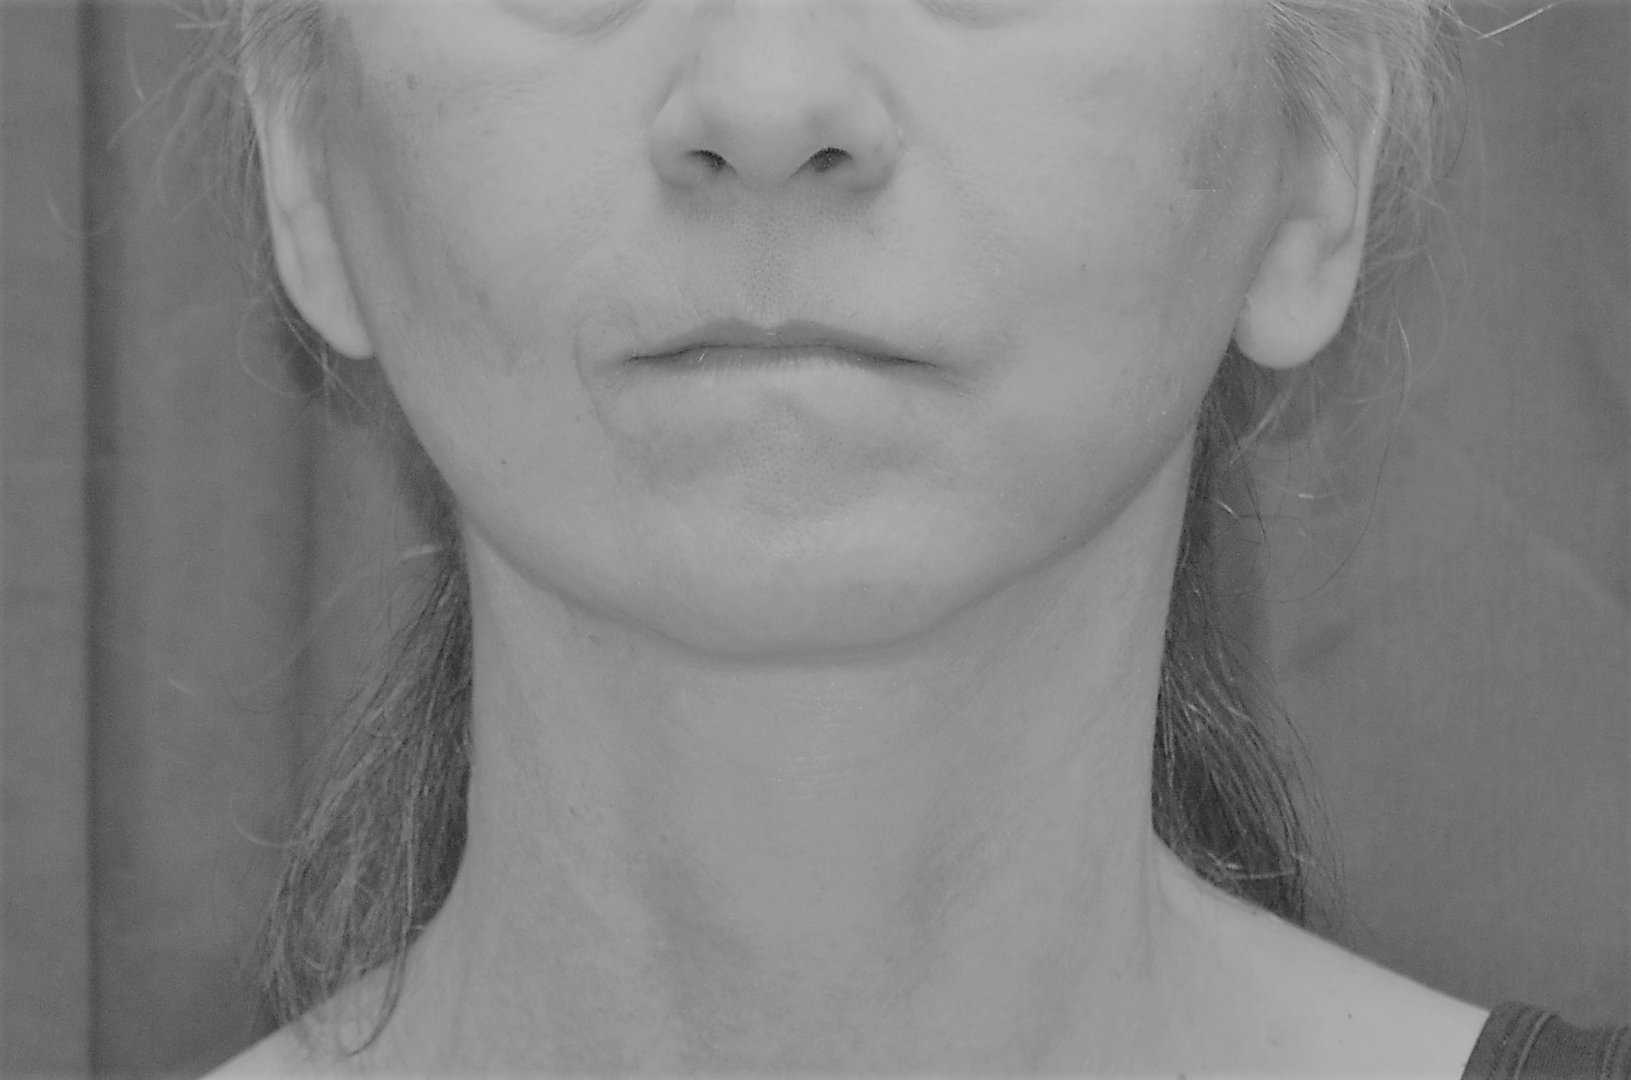 Face neck front view 6 day post op BW